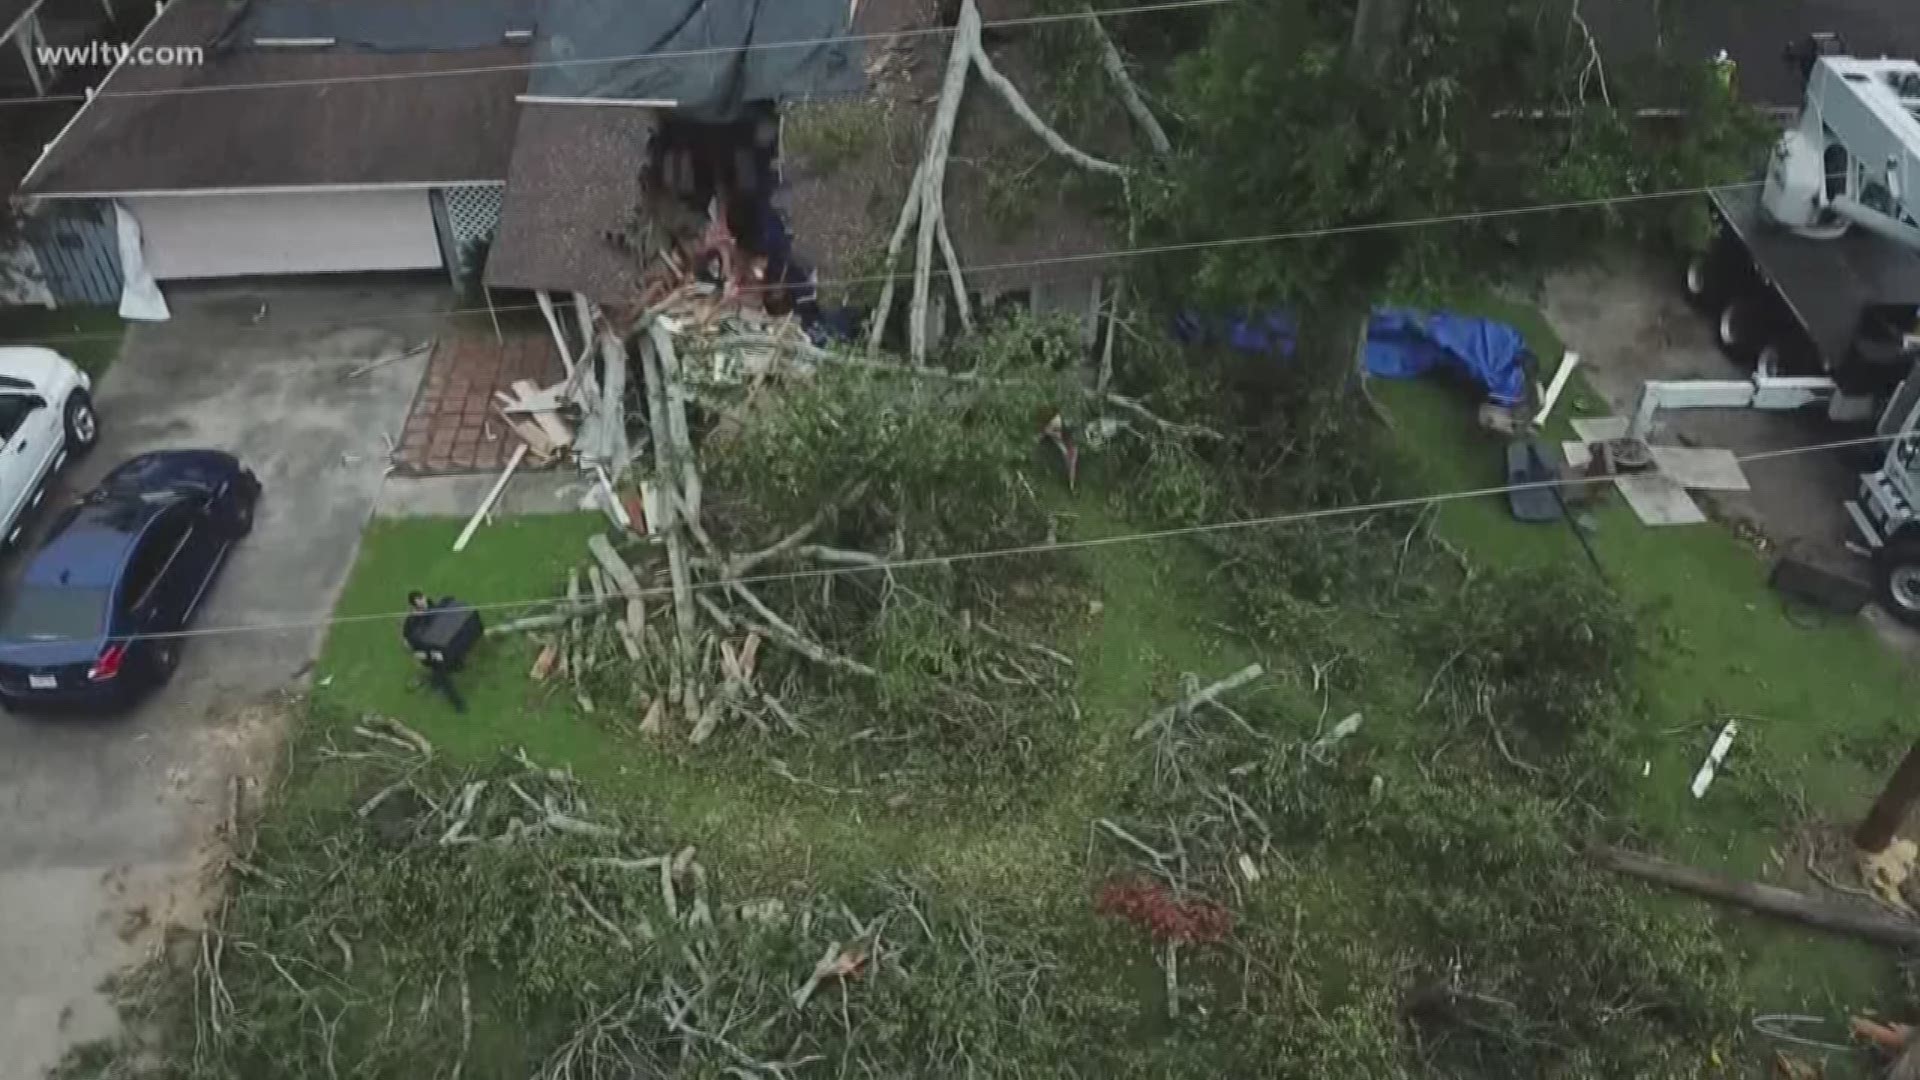 National Weather Service survey crews were out Friday to assess the damage from a confirmed EF-1 tornado in Prairieville.